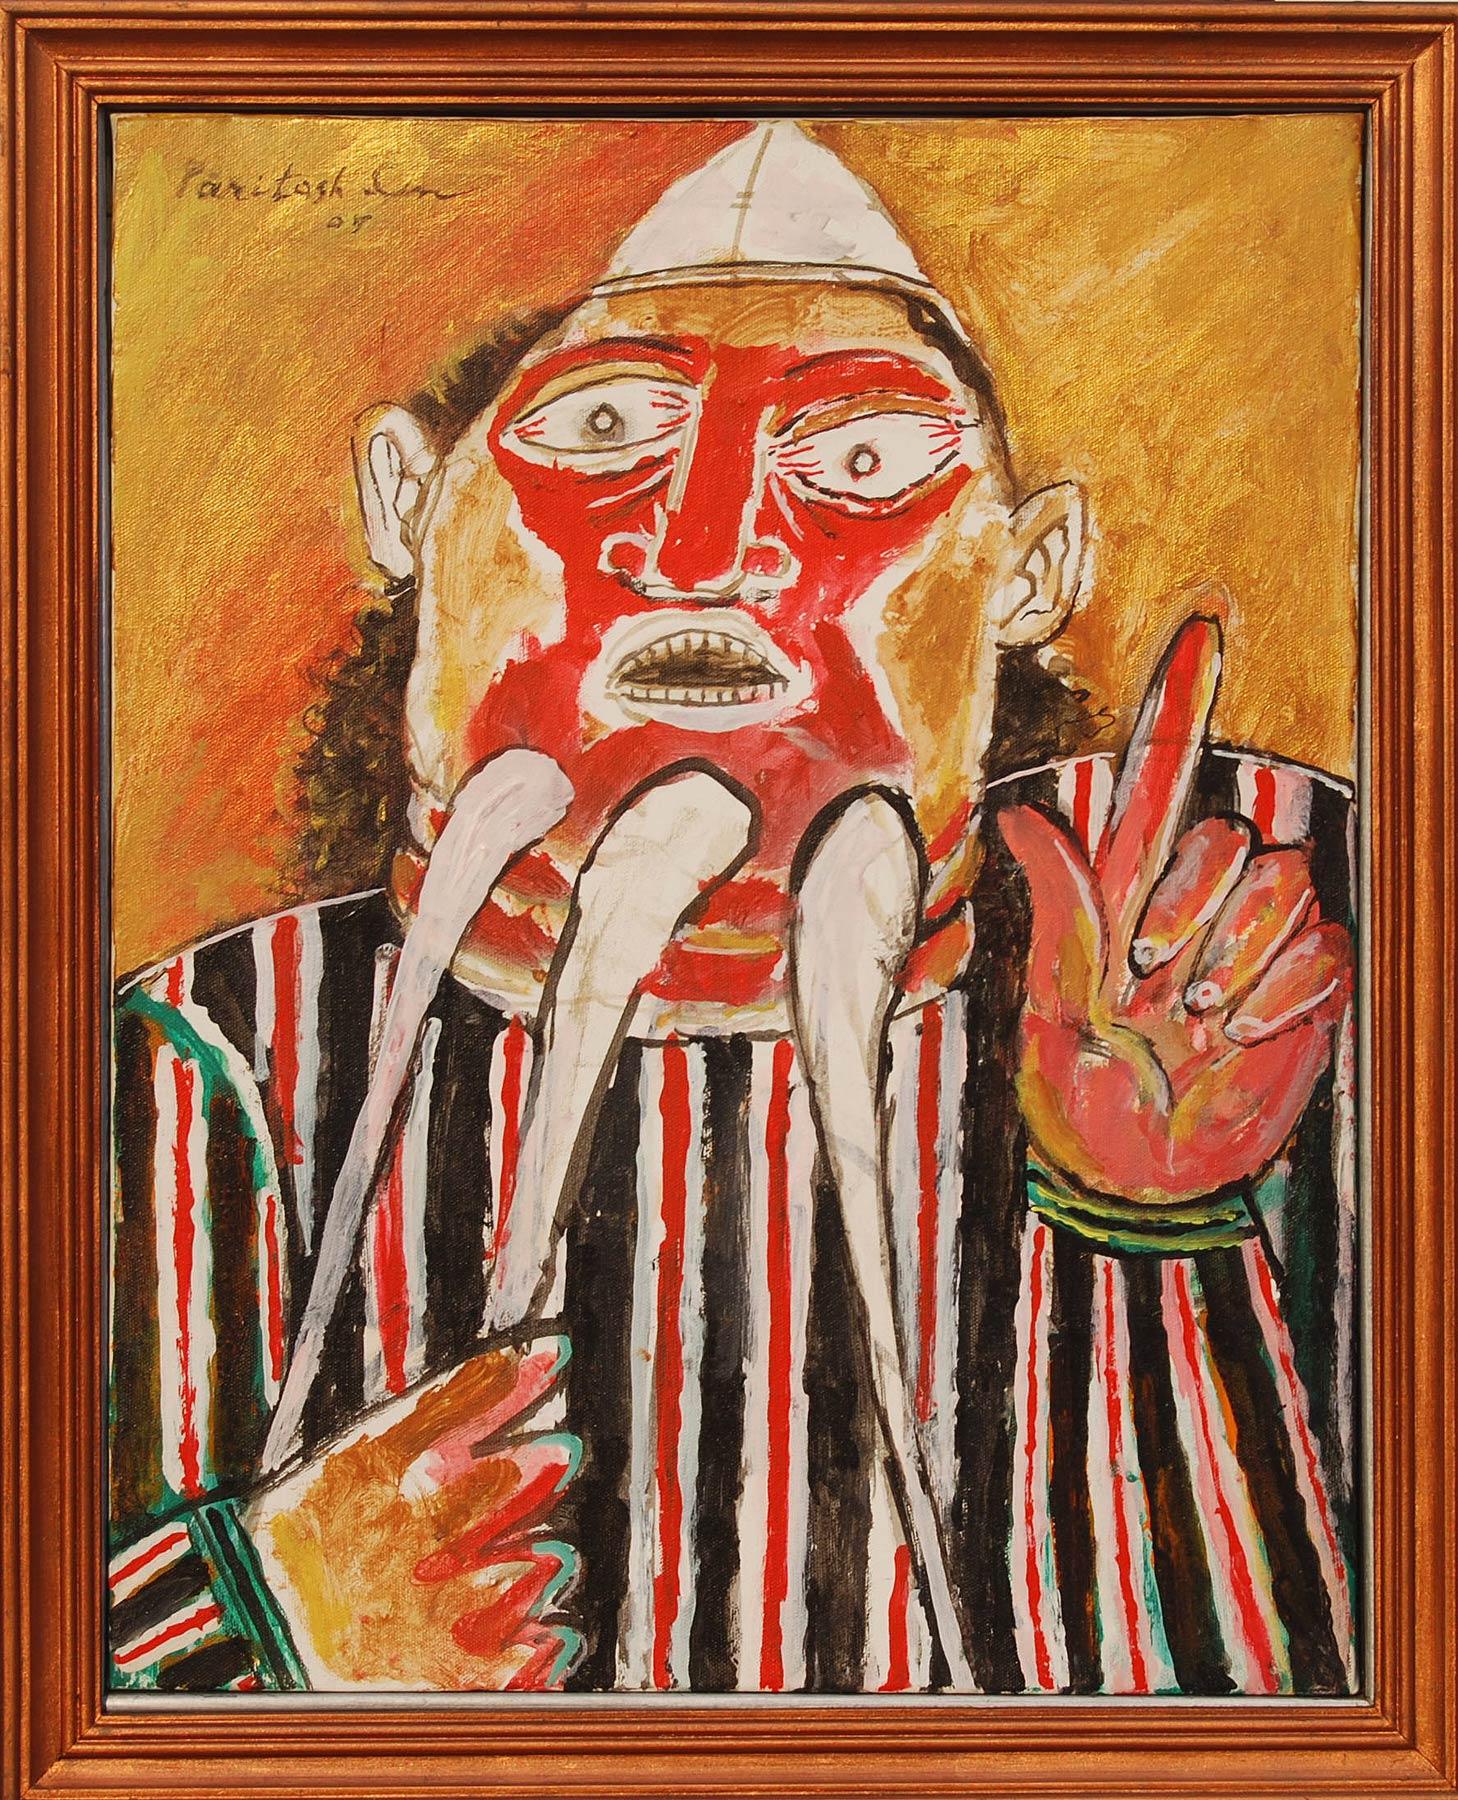 Paritosh Sen Figurative Painting - The Rabble Rouser, Acrylic, Red, Yellow, Black by Student of Picasso "In Stock"